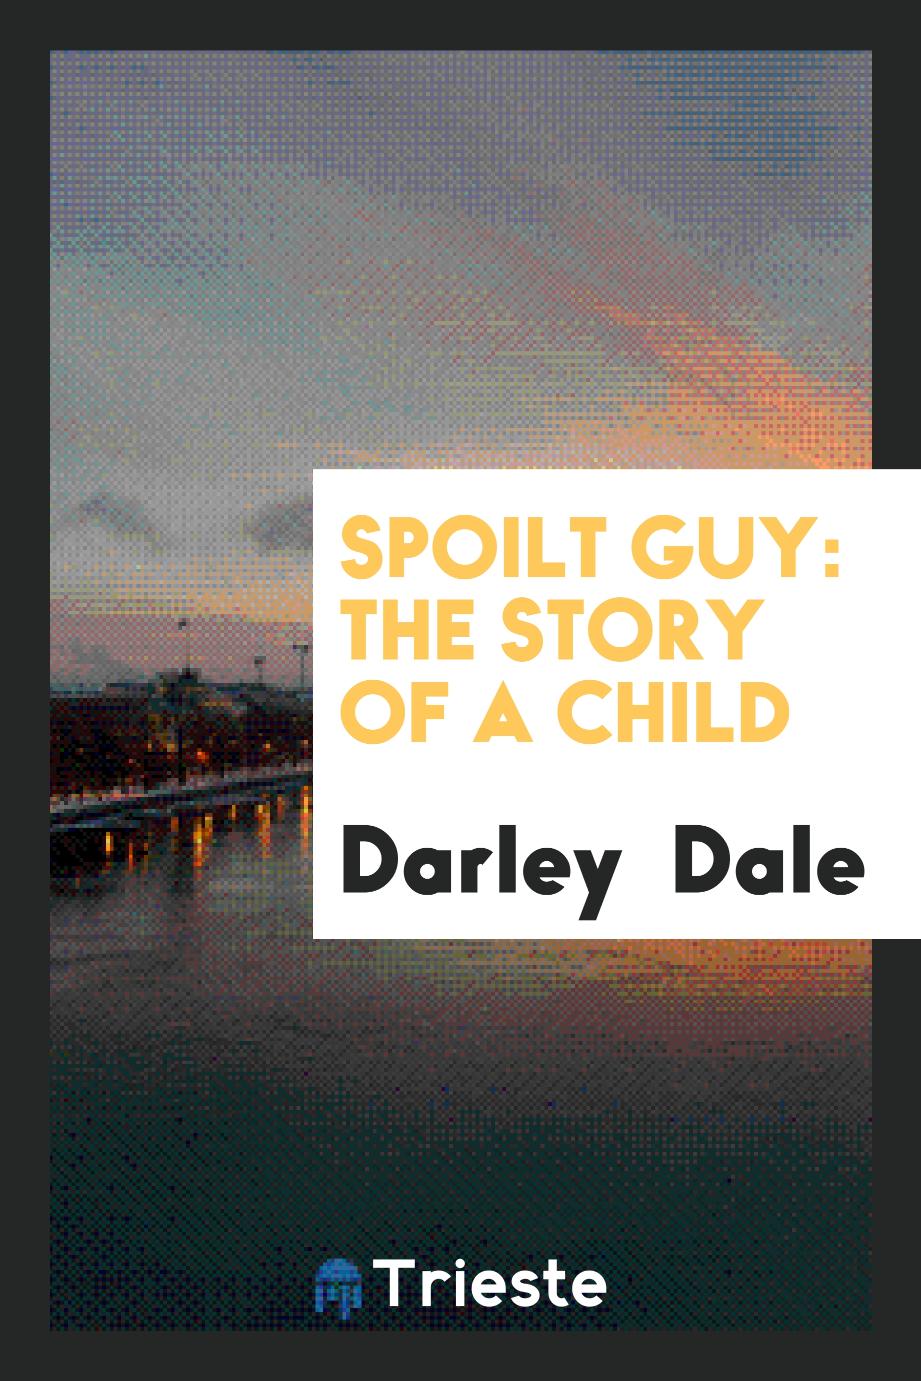 Spoilt Guy: The Story of a Child